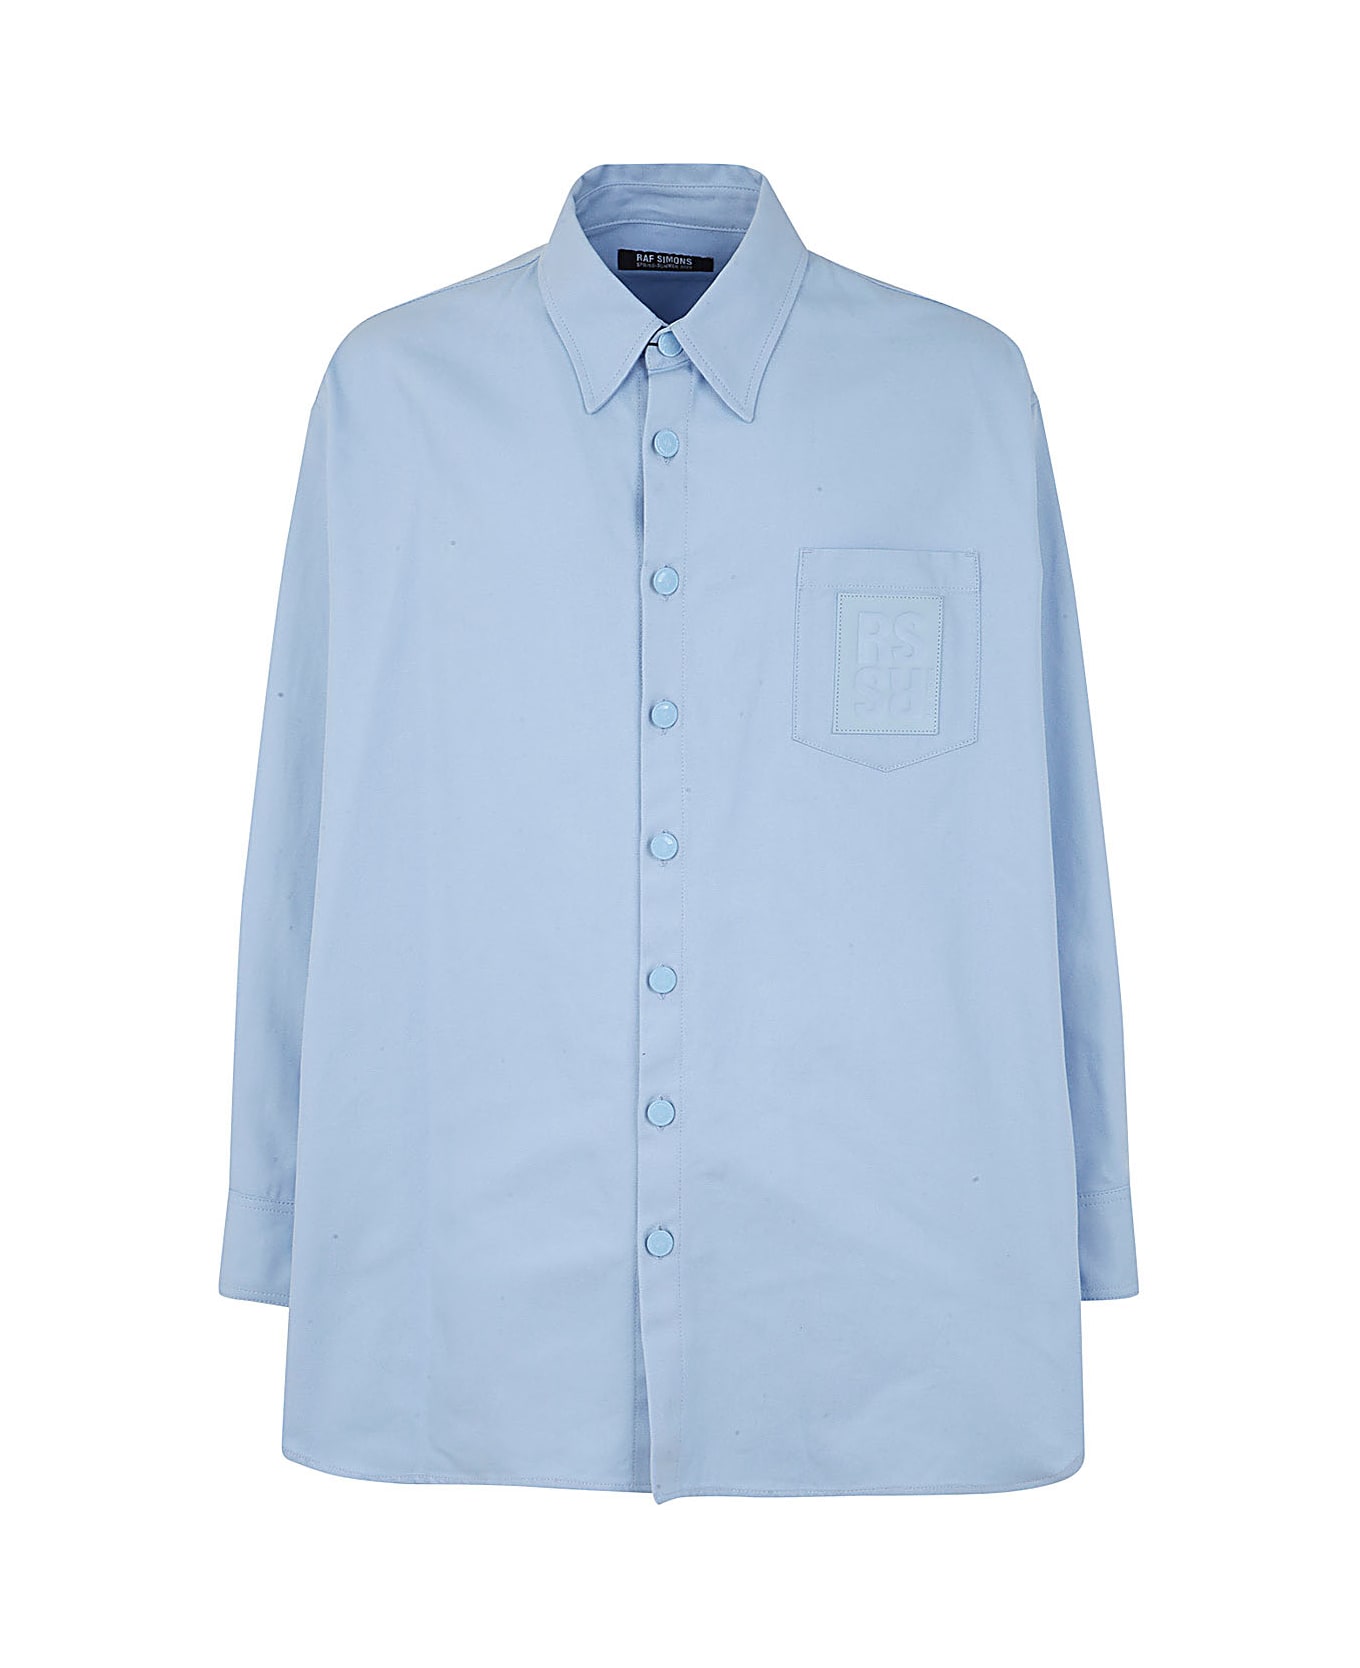 Raf Simons Oversized Denim Shirt With Leather Patch - Light Blue